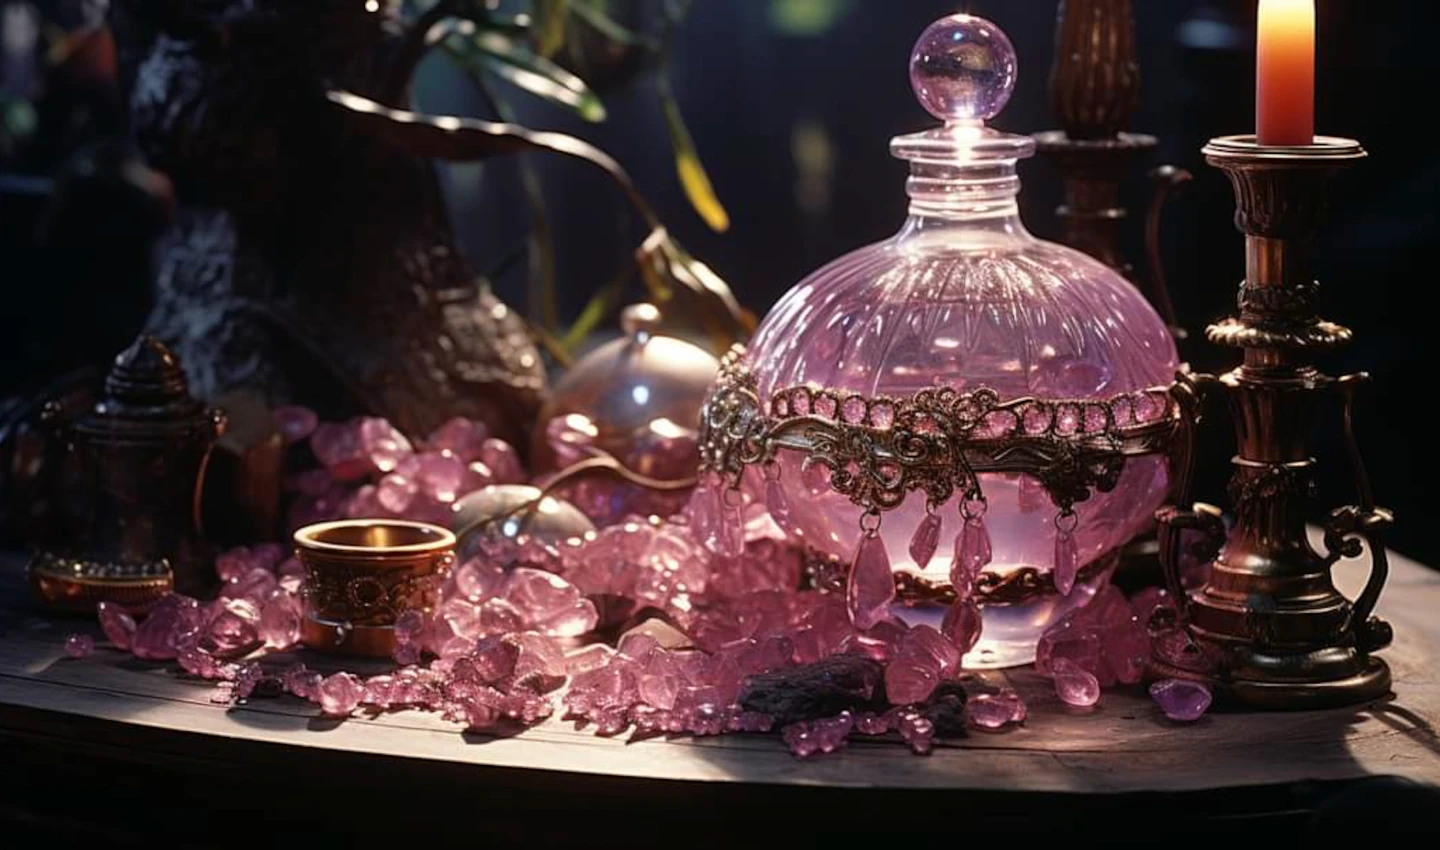 An artistic display of flowers and natural elements, encapsulating the essence of ancient perfume and aromatherapy techniques that continue to inspire modern fragrances.